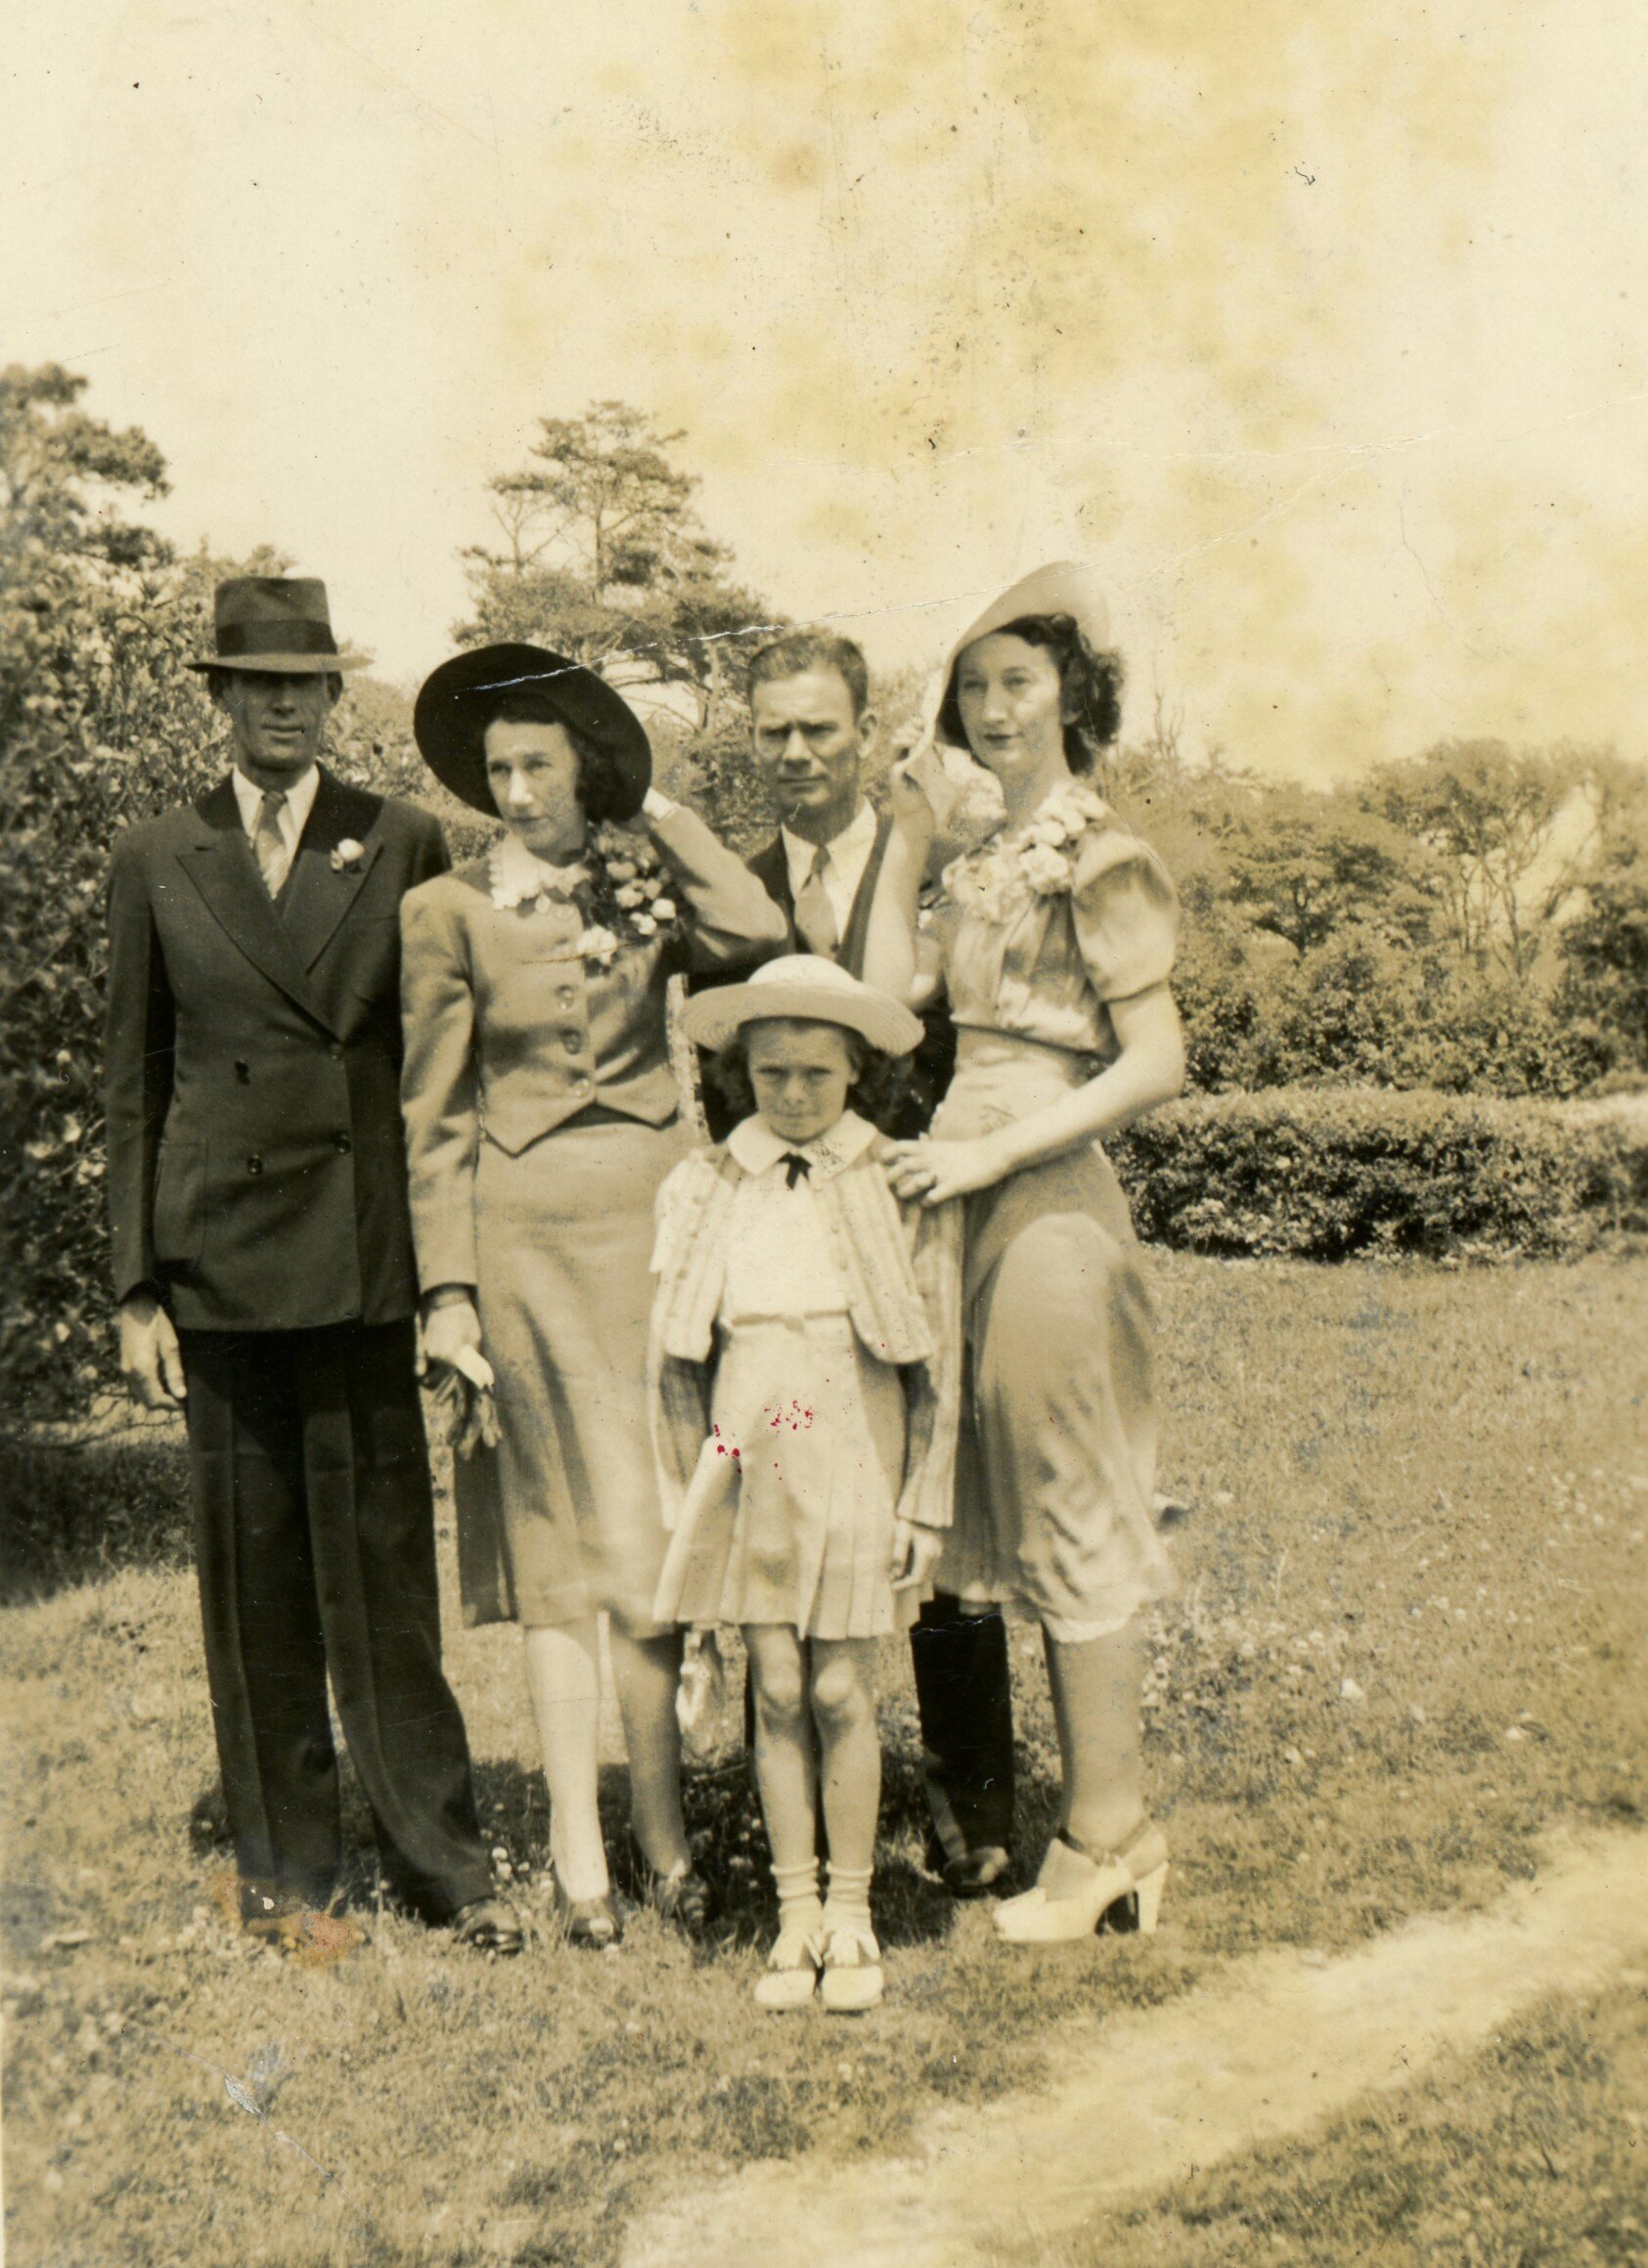 L to R: Harry and Virgie Chadwick Davis, Claude, Evelyn, and young girl is Sue, Claude’s daughter